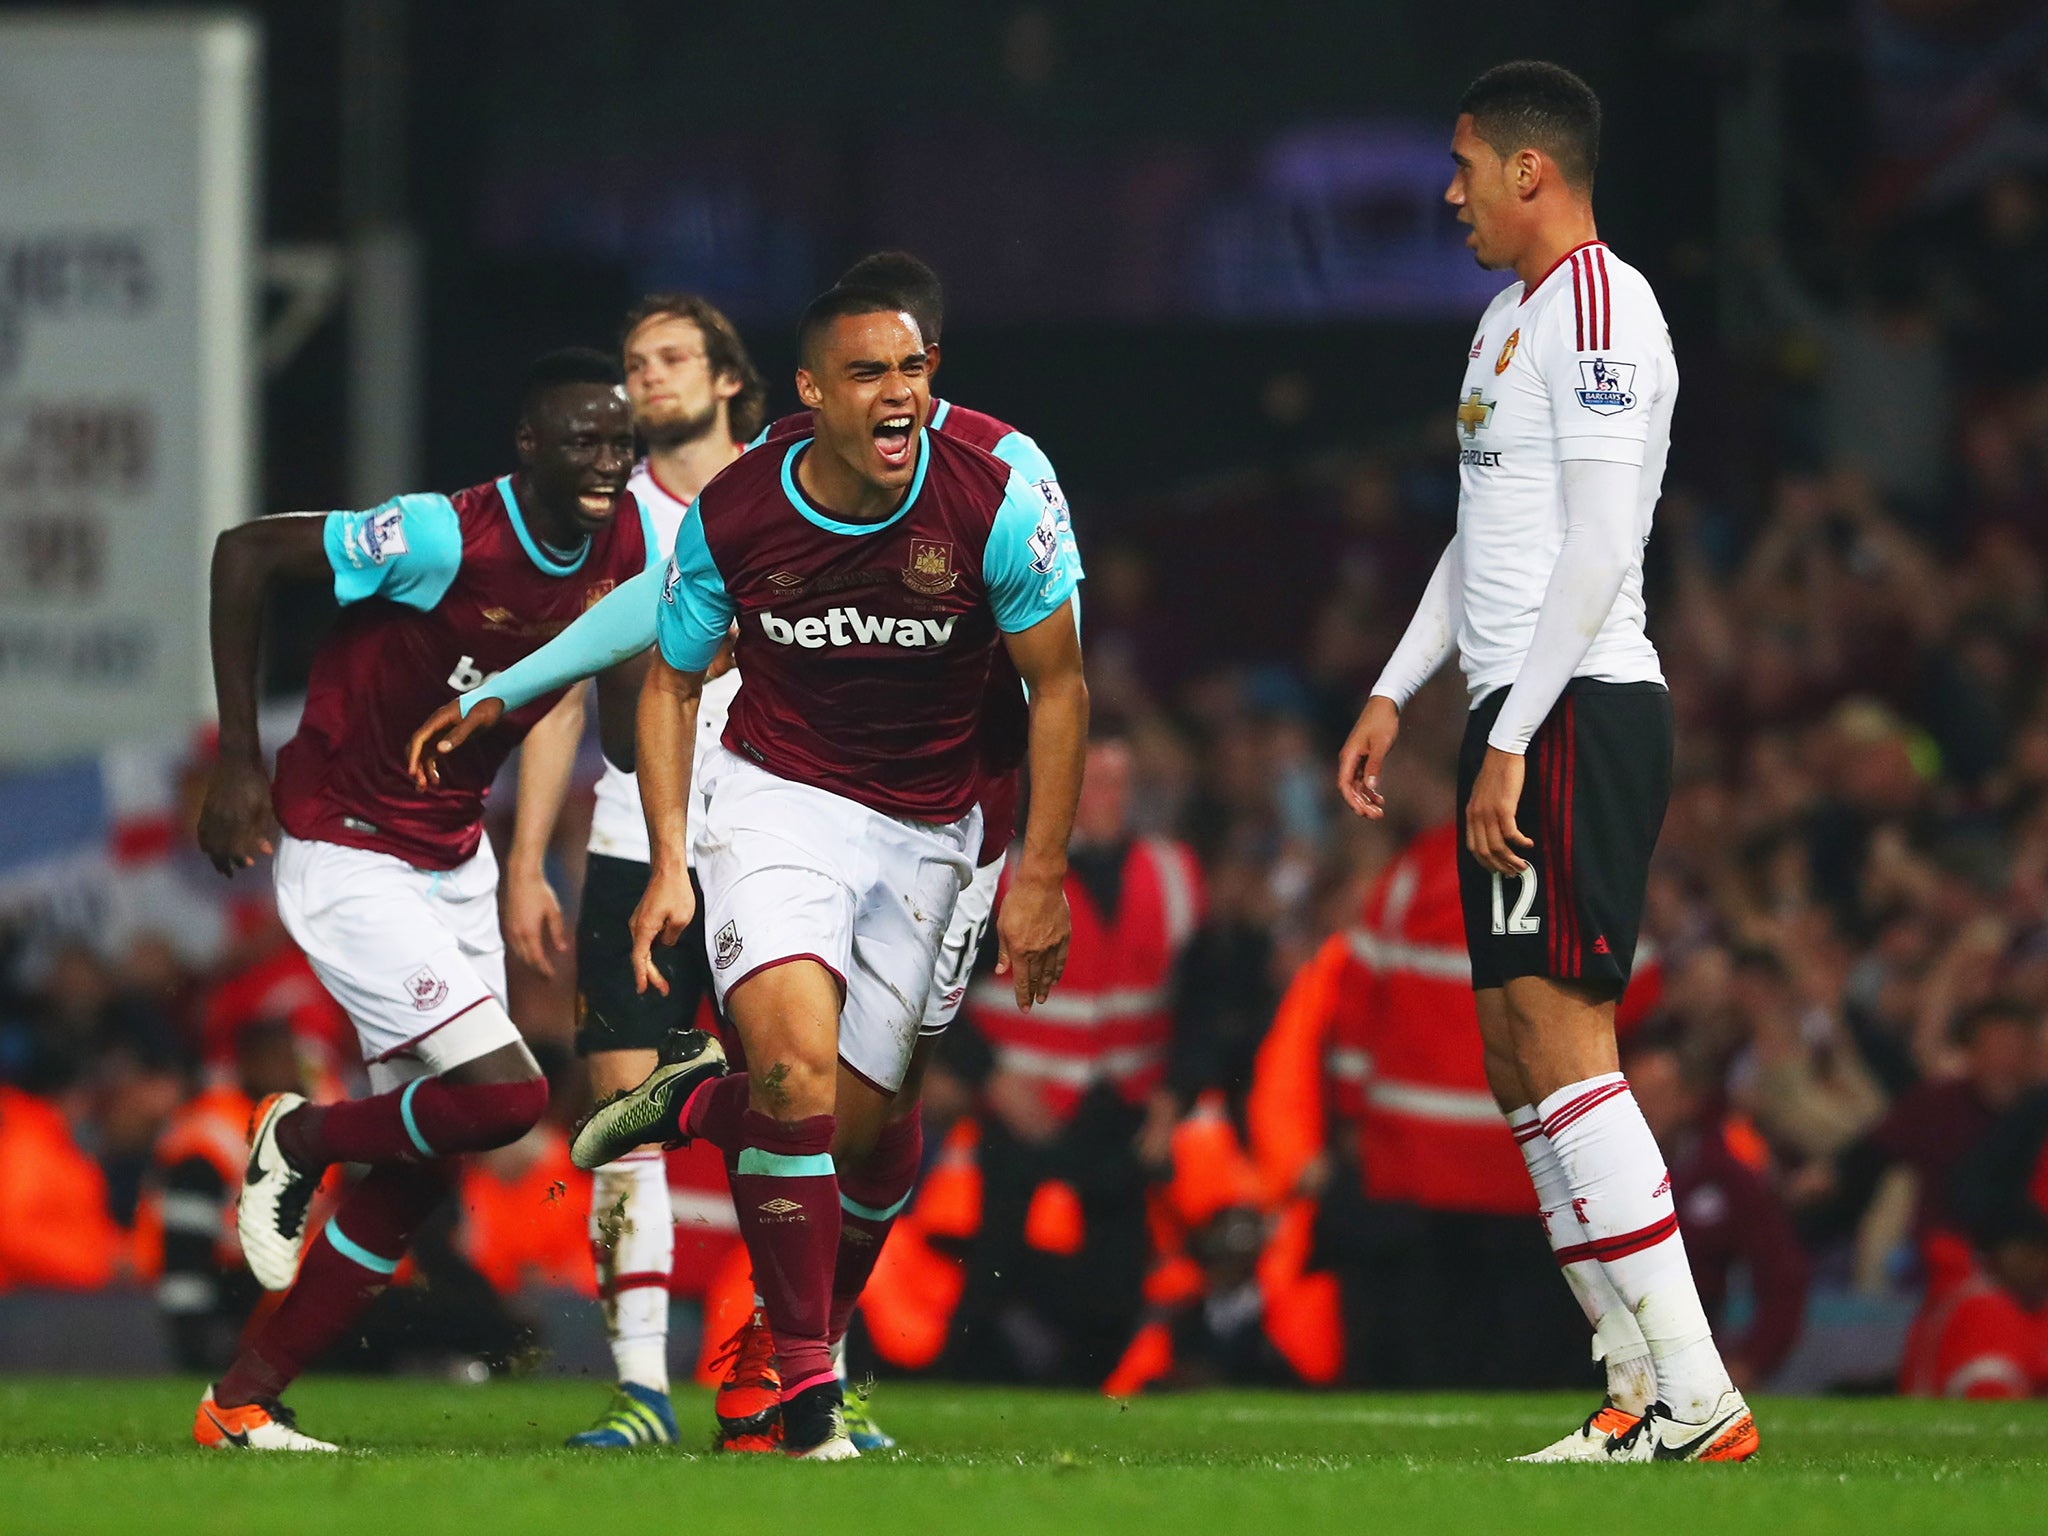 West Ham vs Manchester United match report: Winston Reid nets winner but bus attack final Boleyn Ground game | The Independent | The Independent